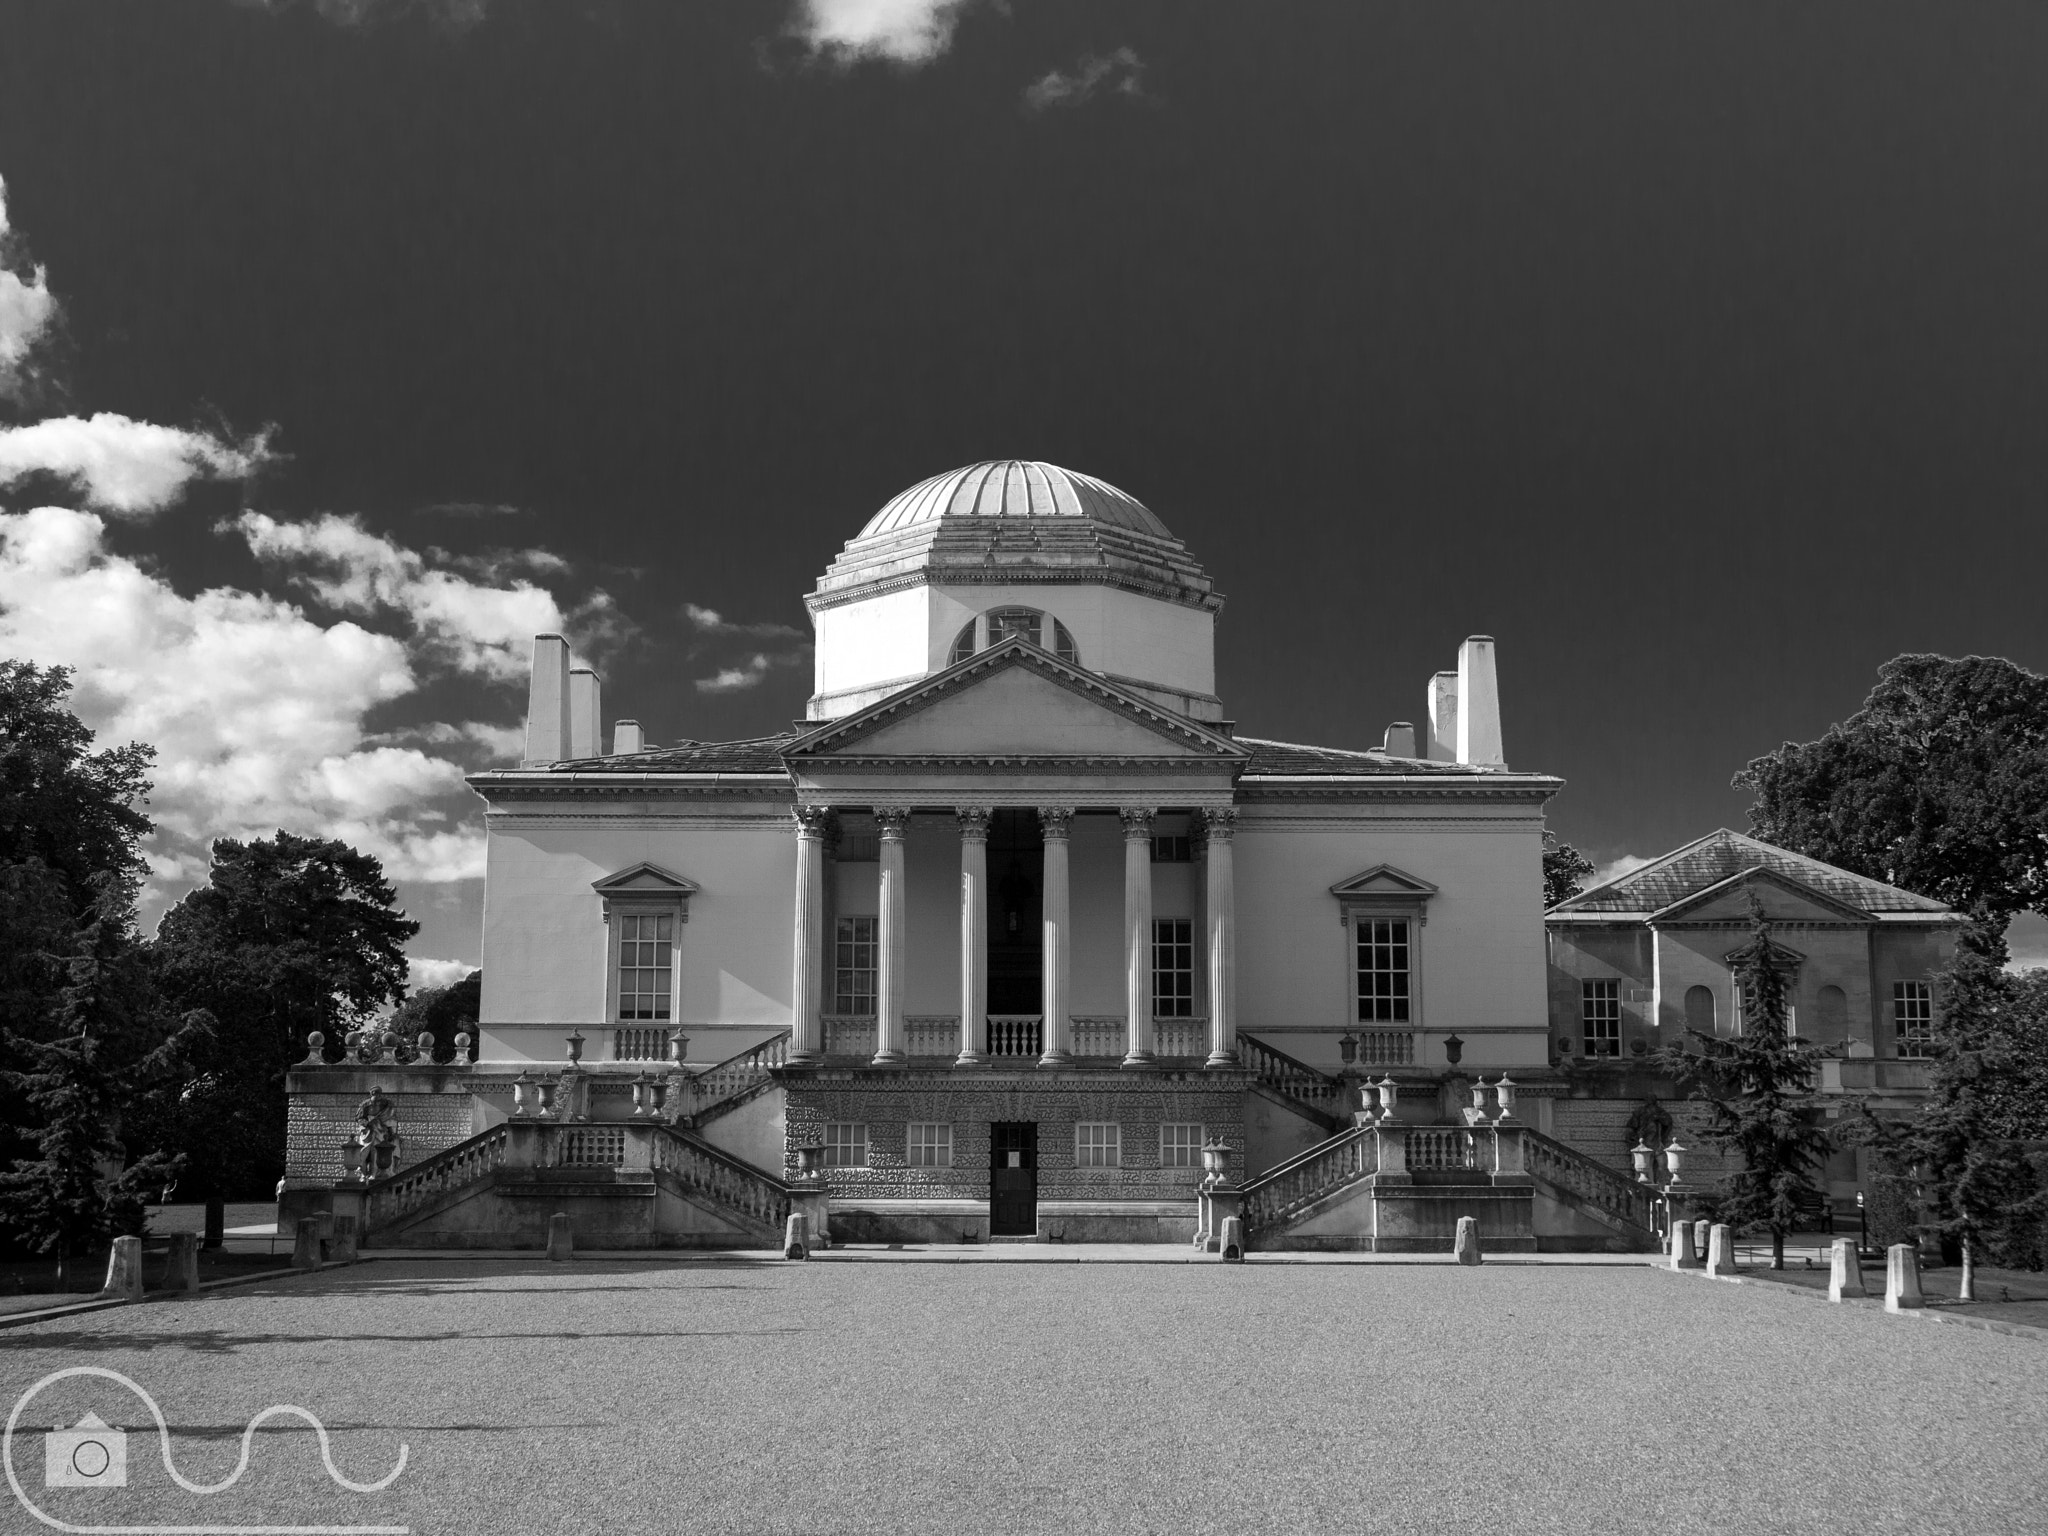 Olympus PEN E-PL3 sample photo. Chiswick house 01 photography